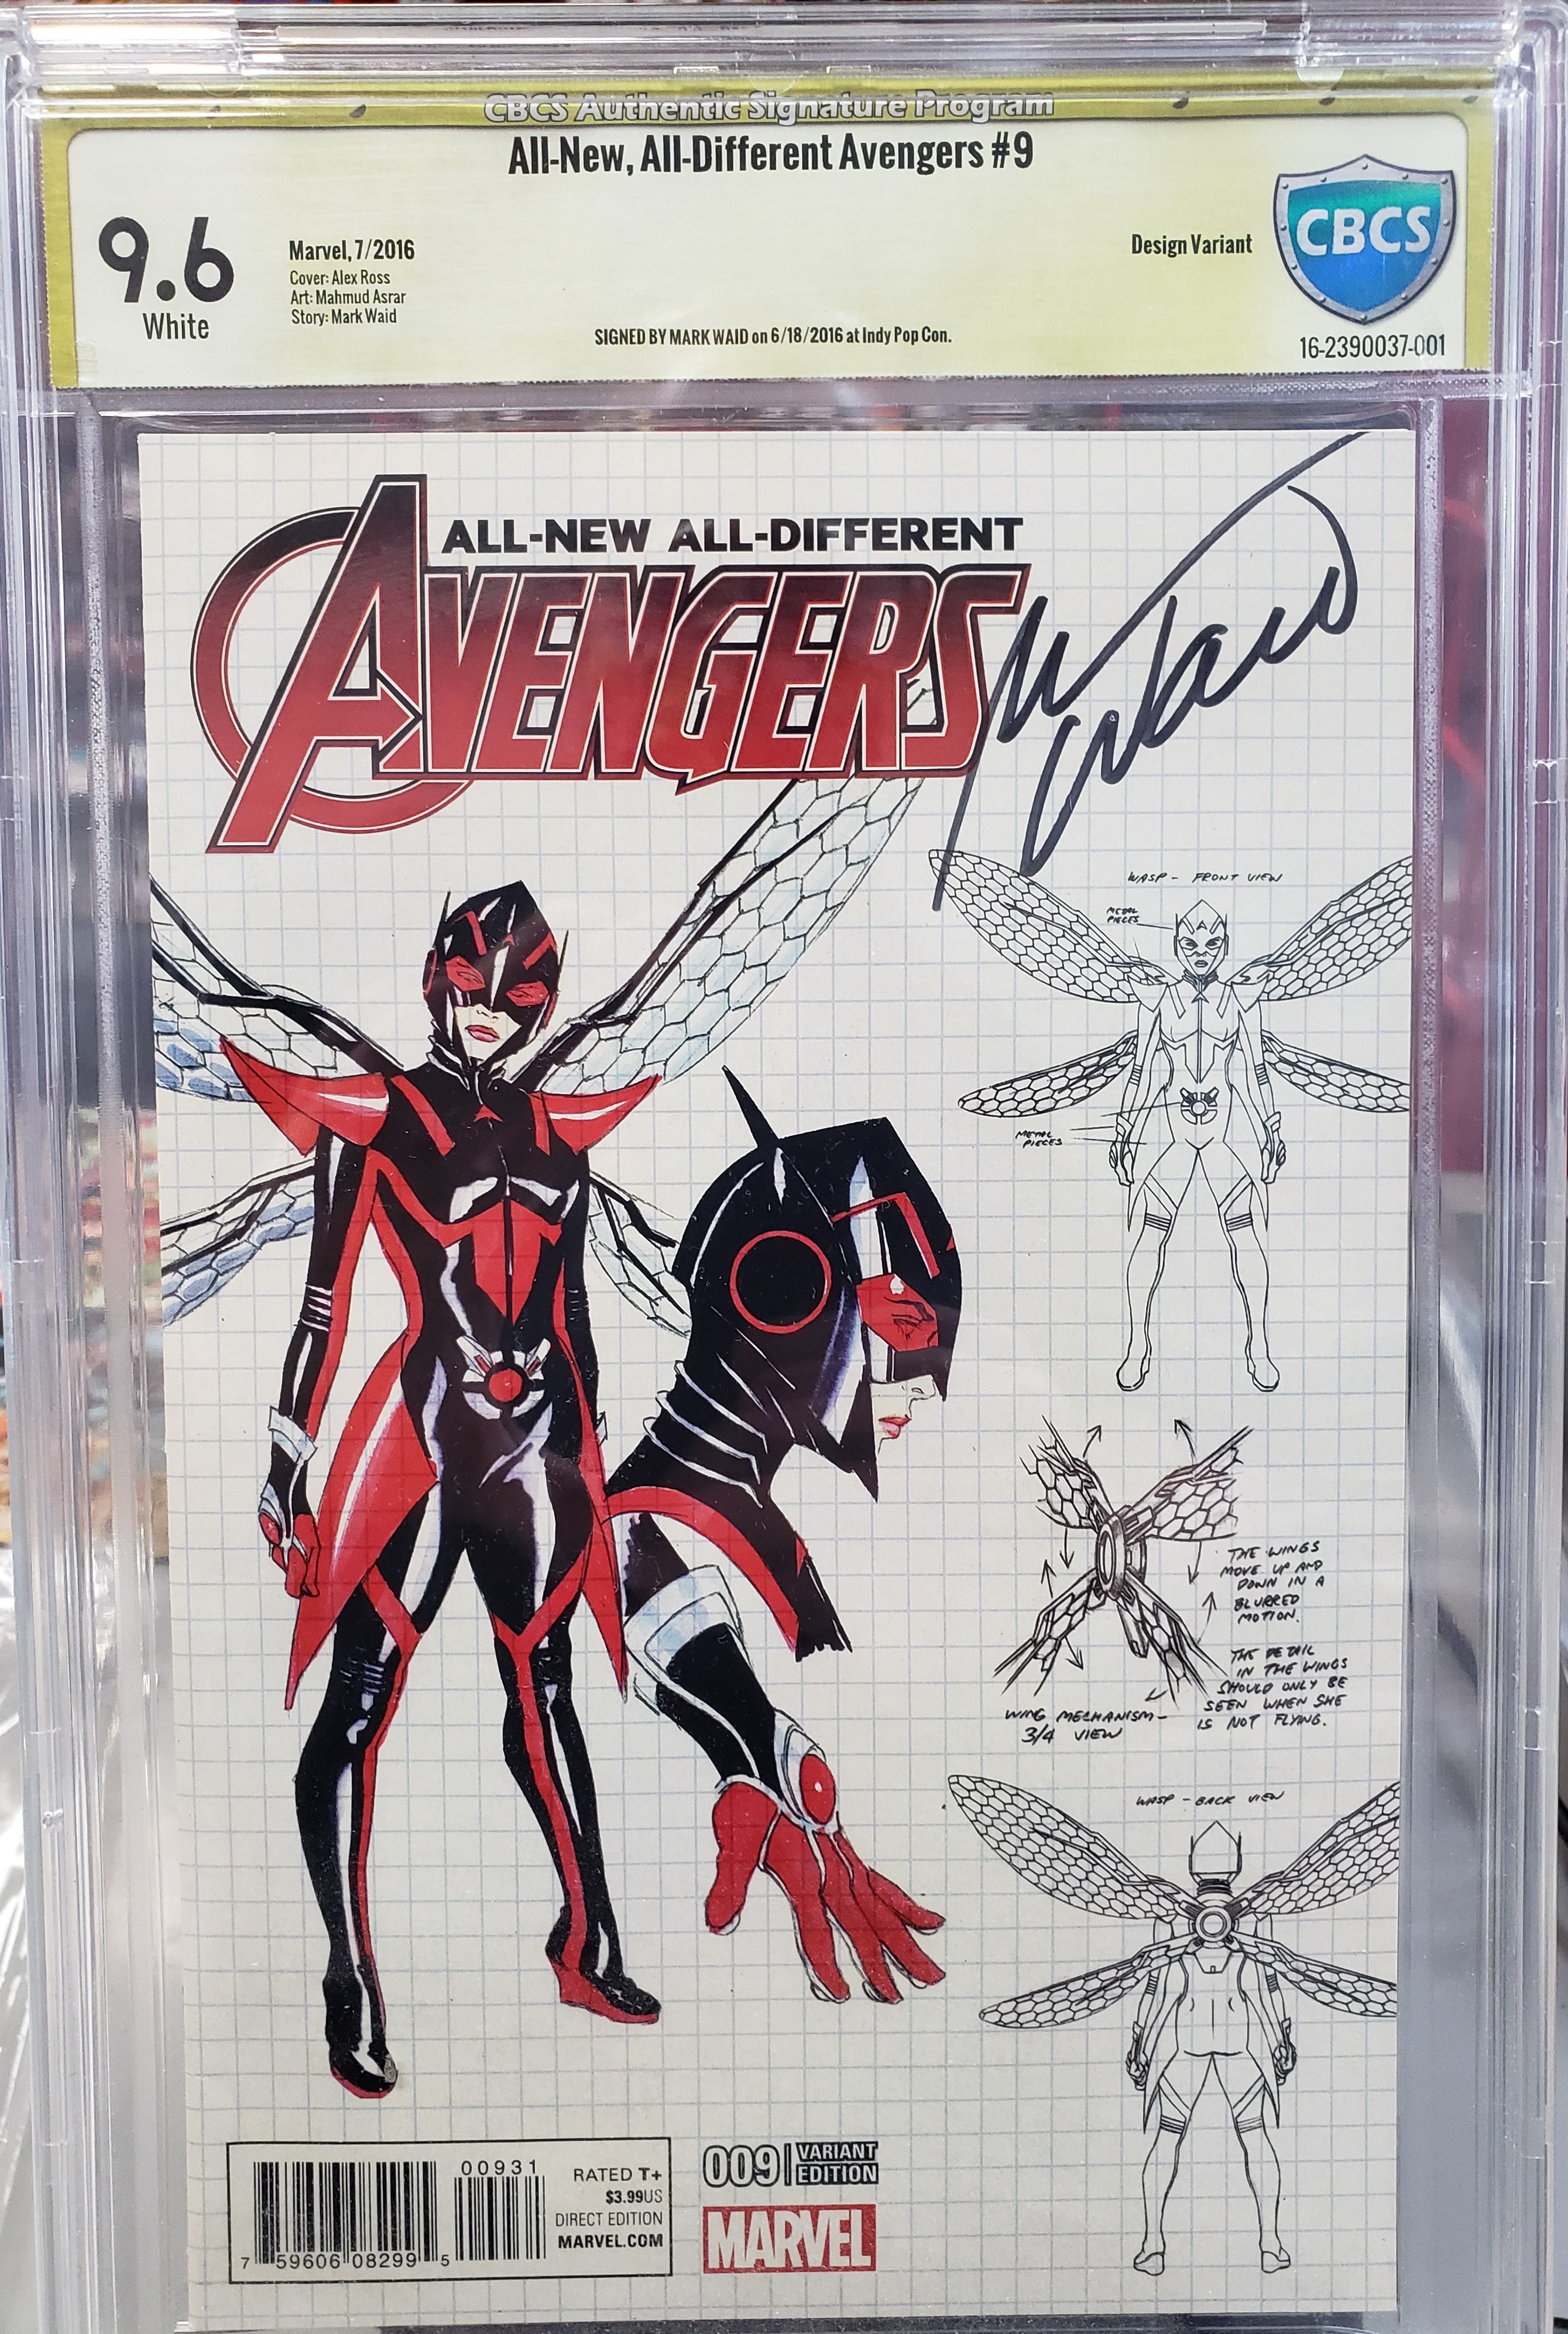 All New All Different Avengers #9 Cbcs 9.6 Signed By Mark Waid. Alex Ross Design Variant